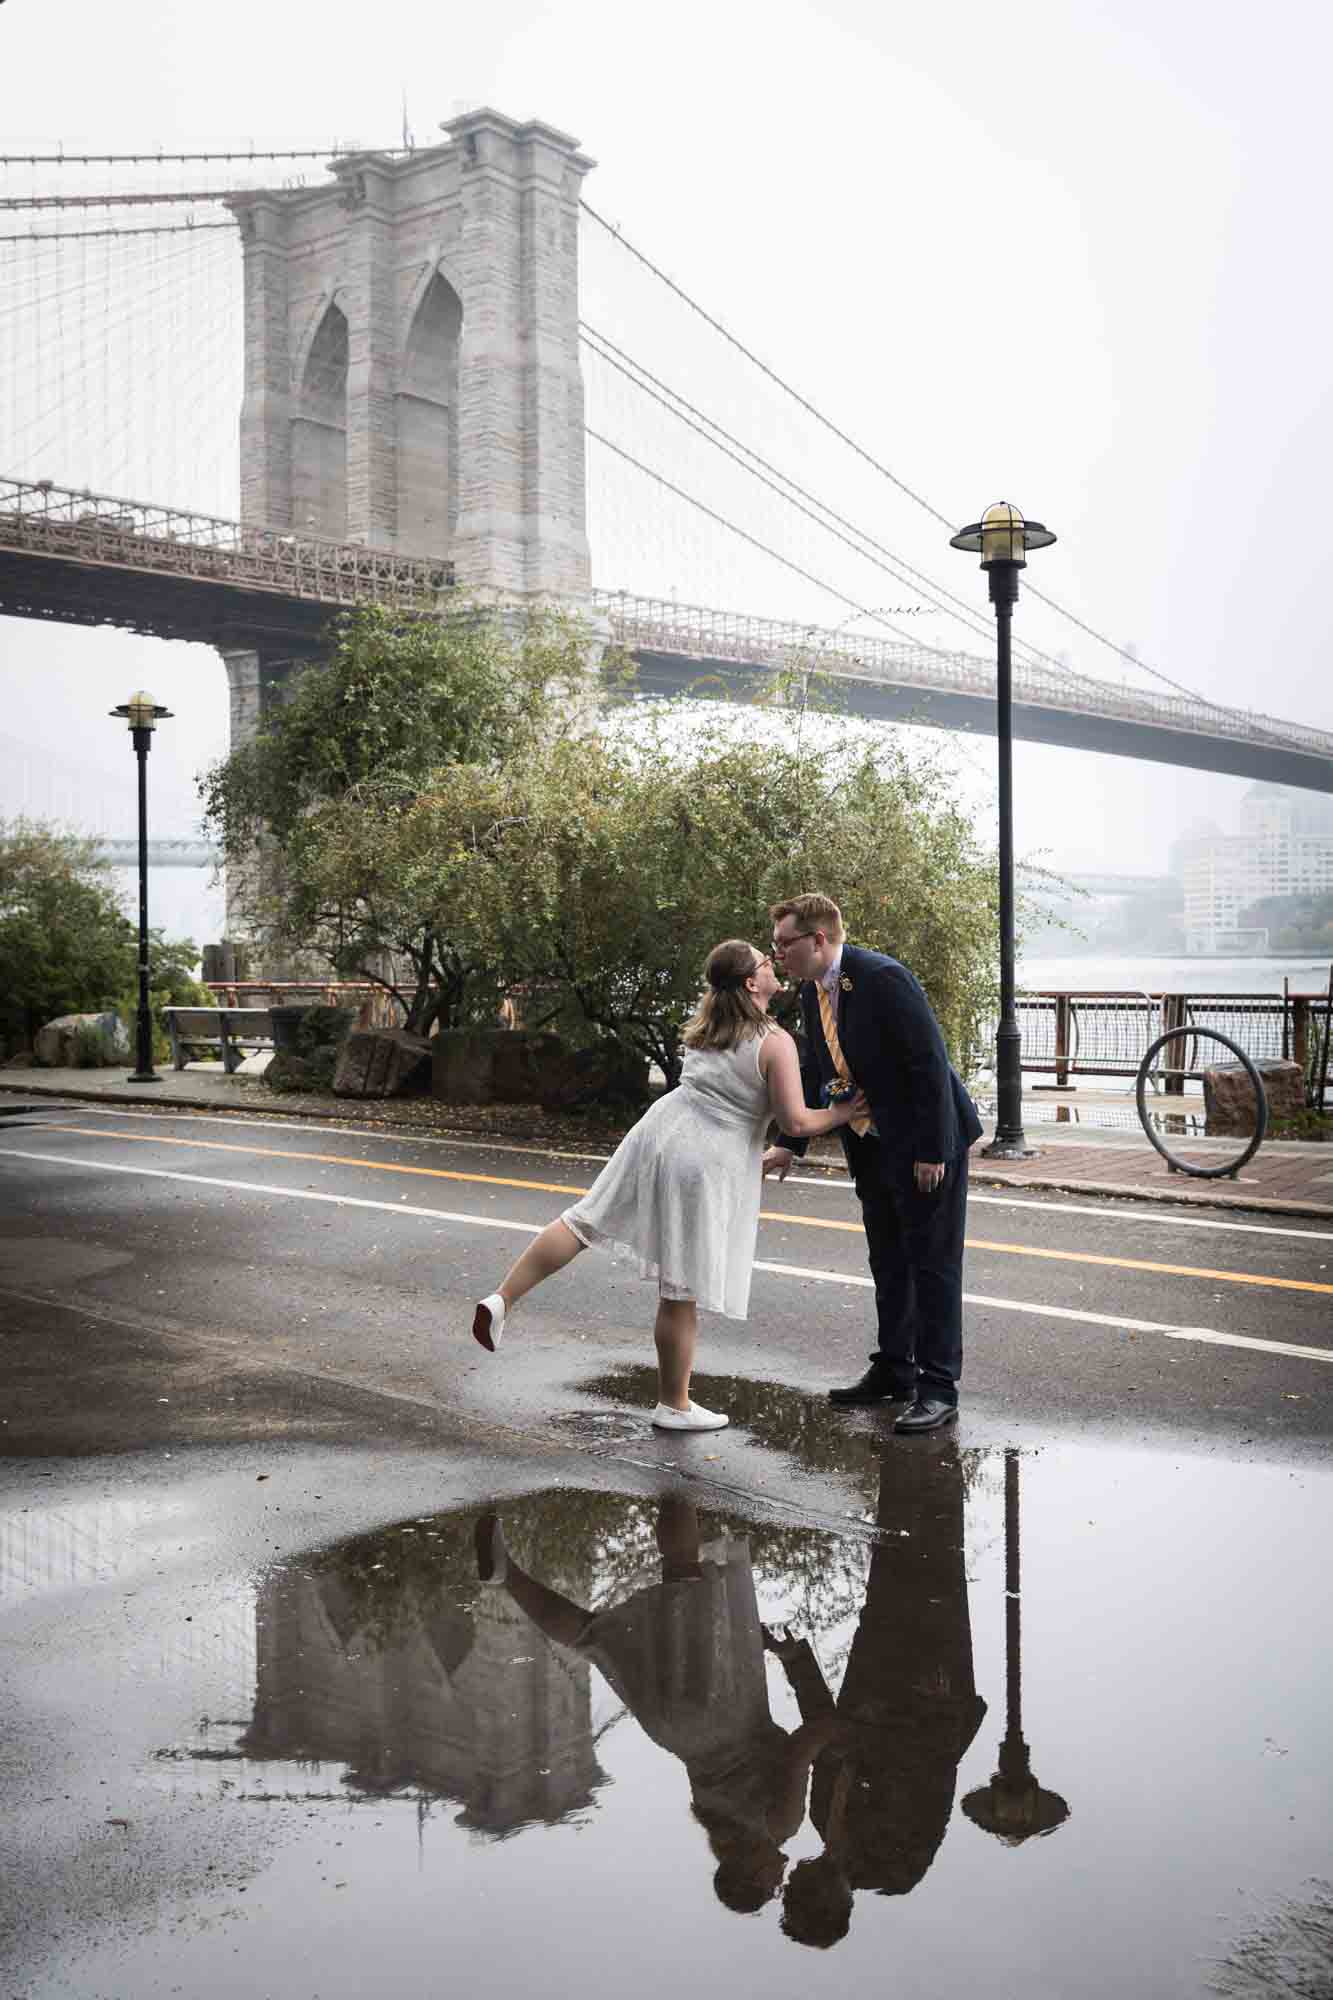 Couple about to kiss in front of rain puddle and Brooklyn Bridge in background for an article on how to get a marriage license in San Antonio